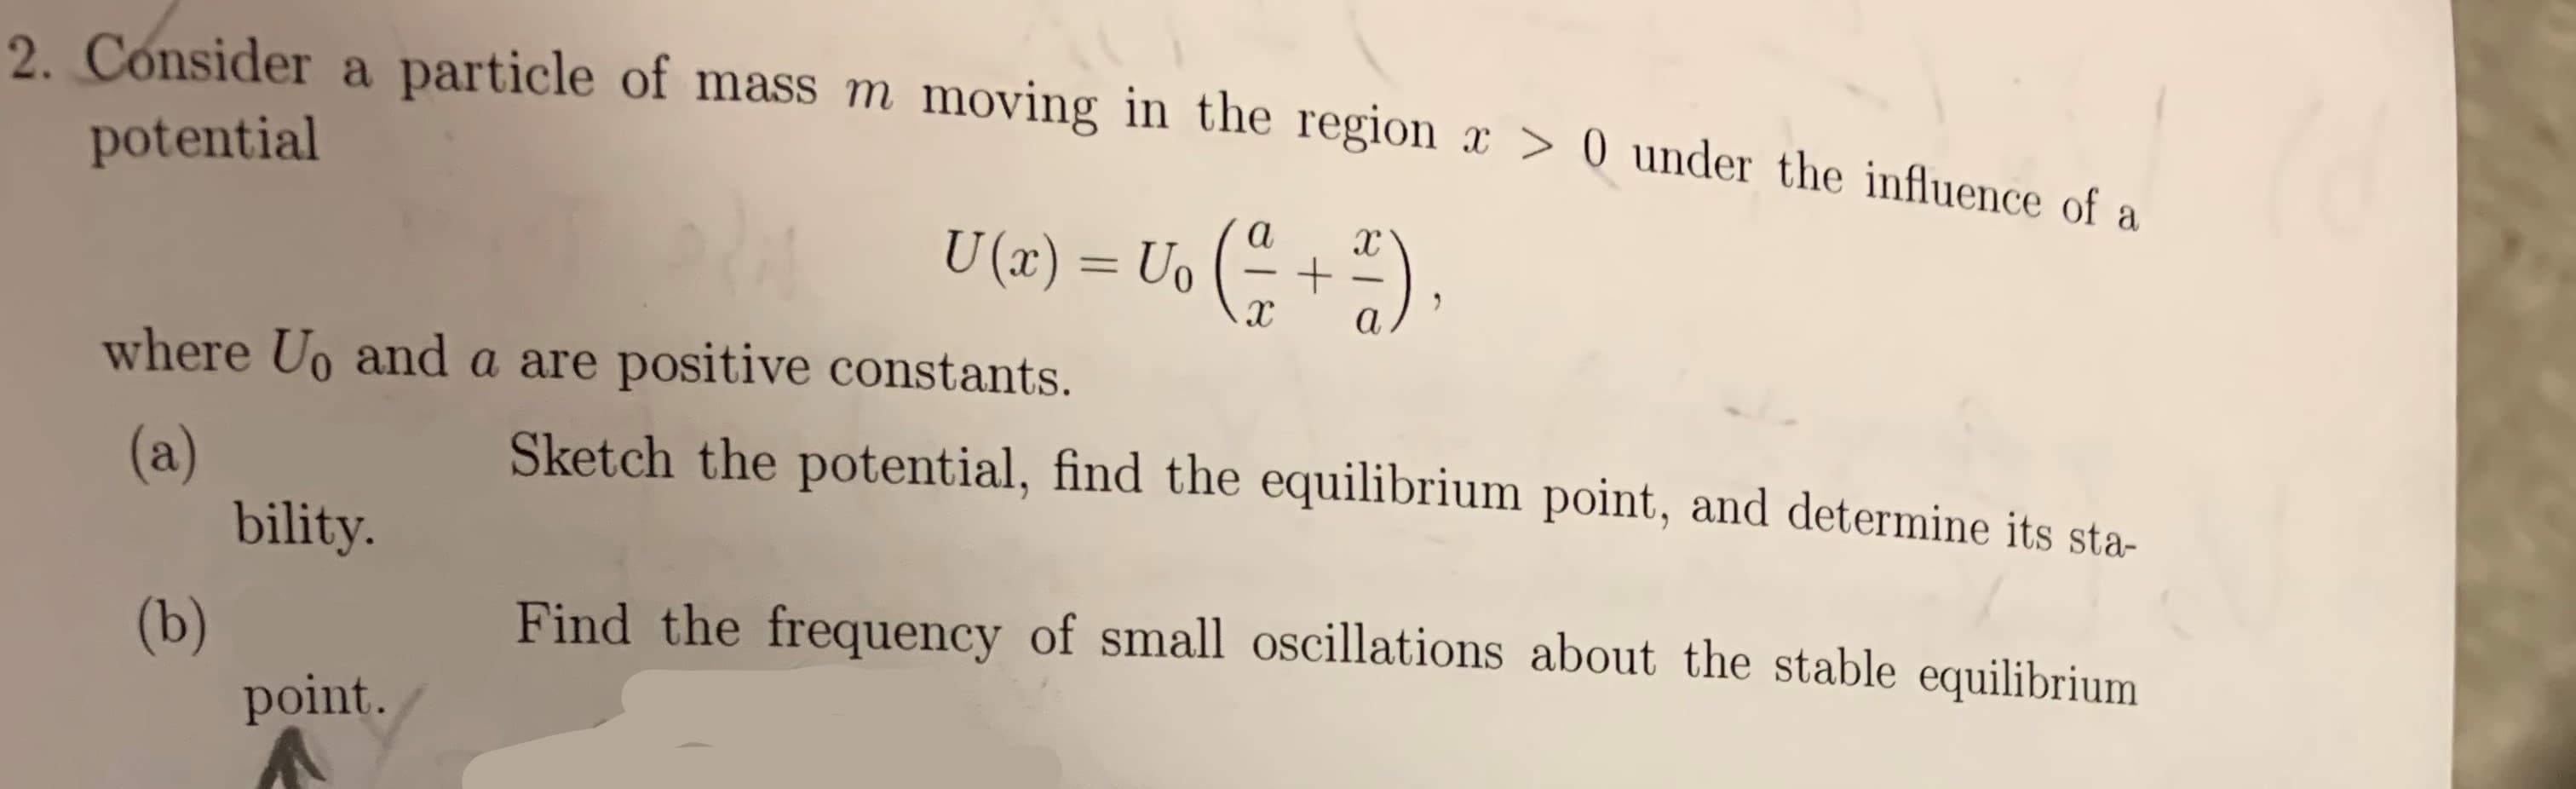 2 Consider a particle of mass m moving in the region x > 0 under the influence of a
potential
U (x) = Uo
а
xc
+
х
а
where Uo and a are positive constants.
Sketch the potential, find the equilibrium point, and determine its sta-
(a)
bility.
Find the frequency of small oscillations about the stable equilibrium
(b)
point.
